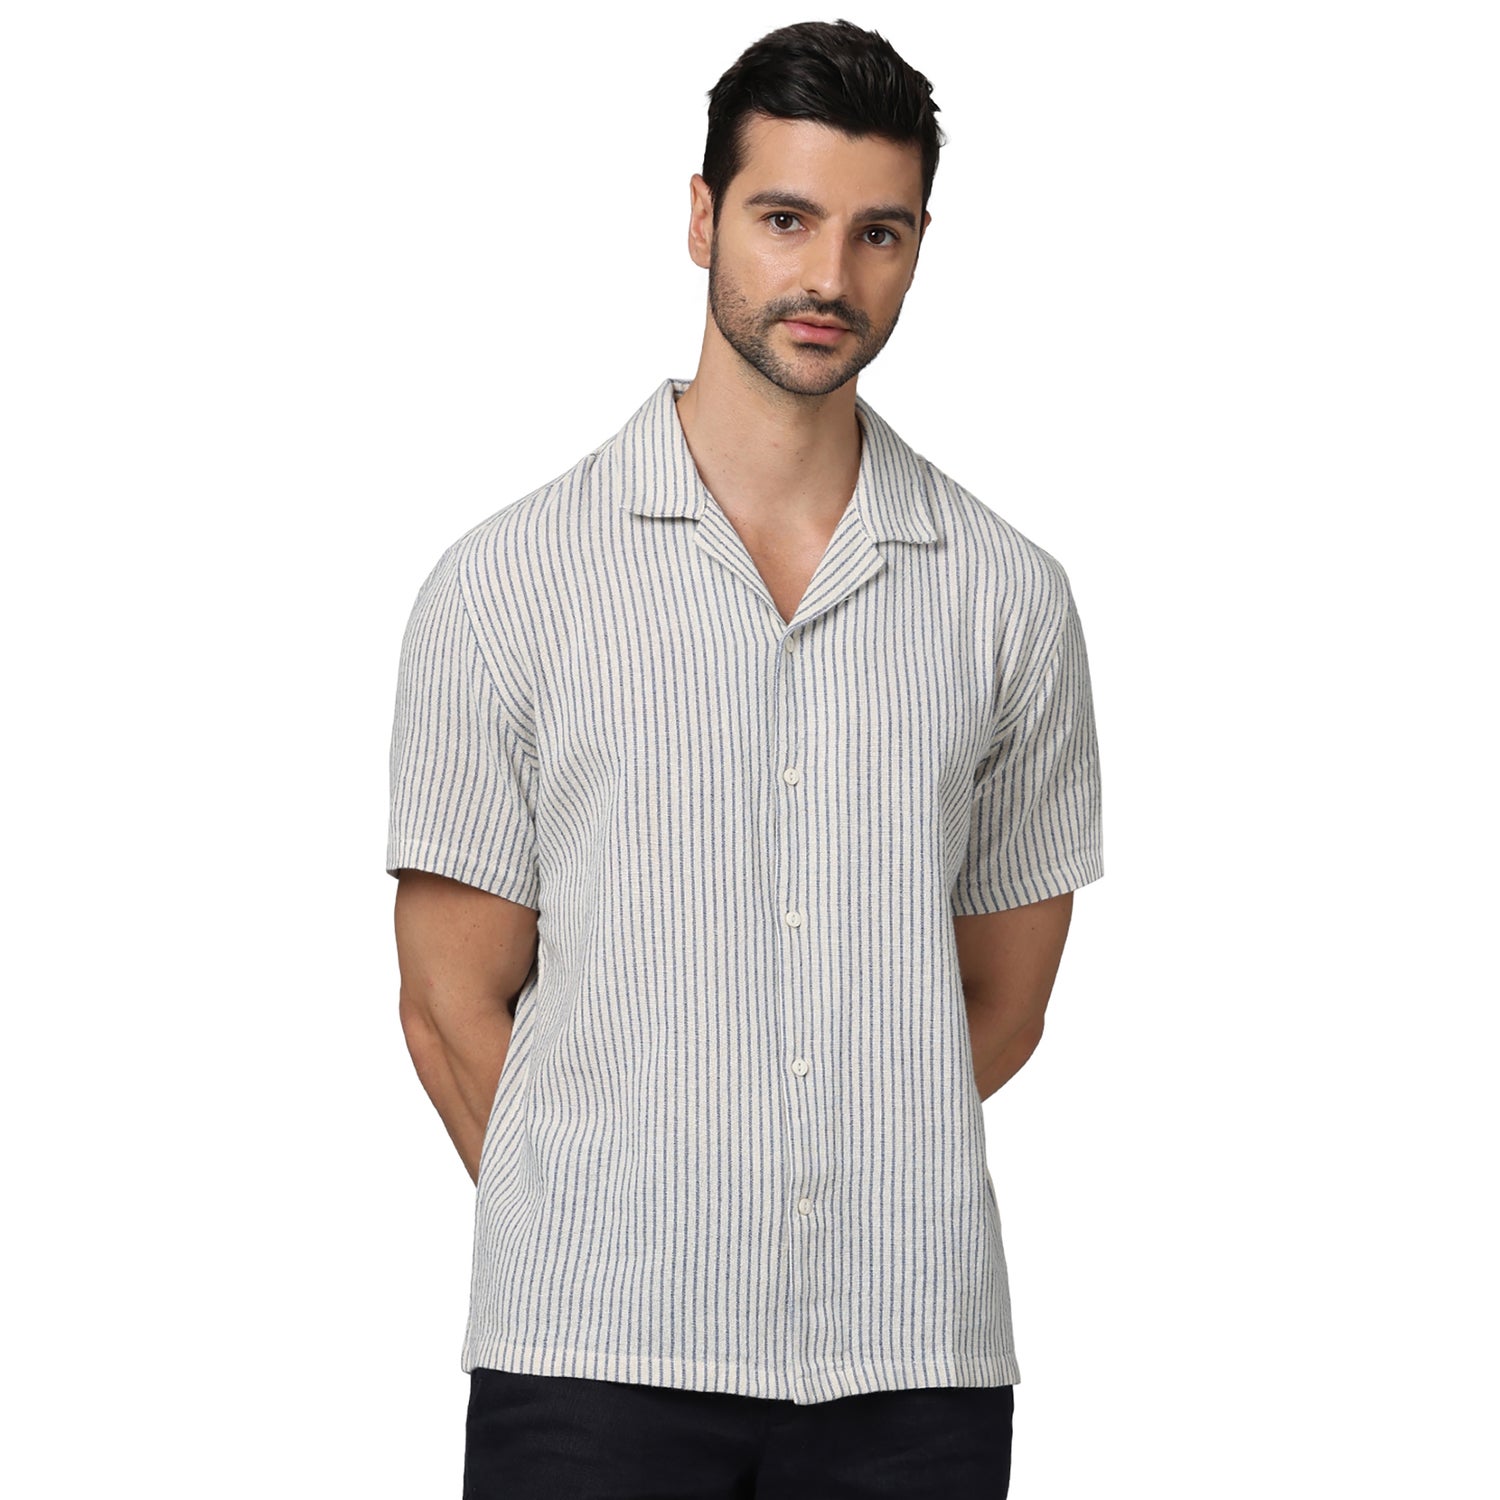 Men's Off White Spread Collar Striped Regular Fit Cotton Casual Shirts (GABALINE)